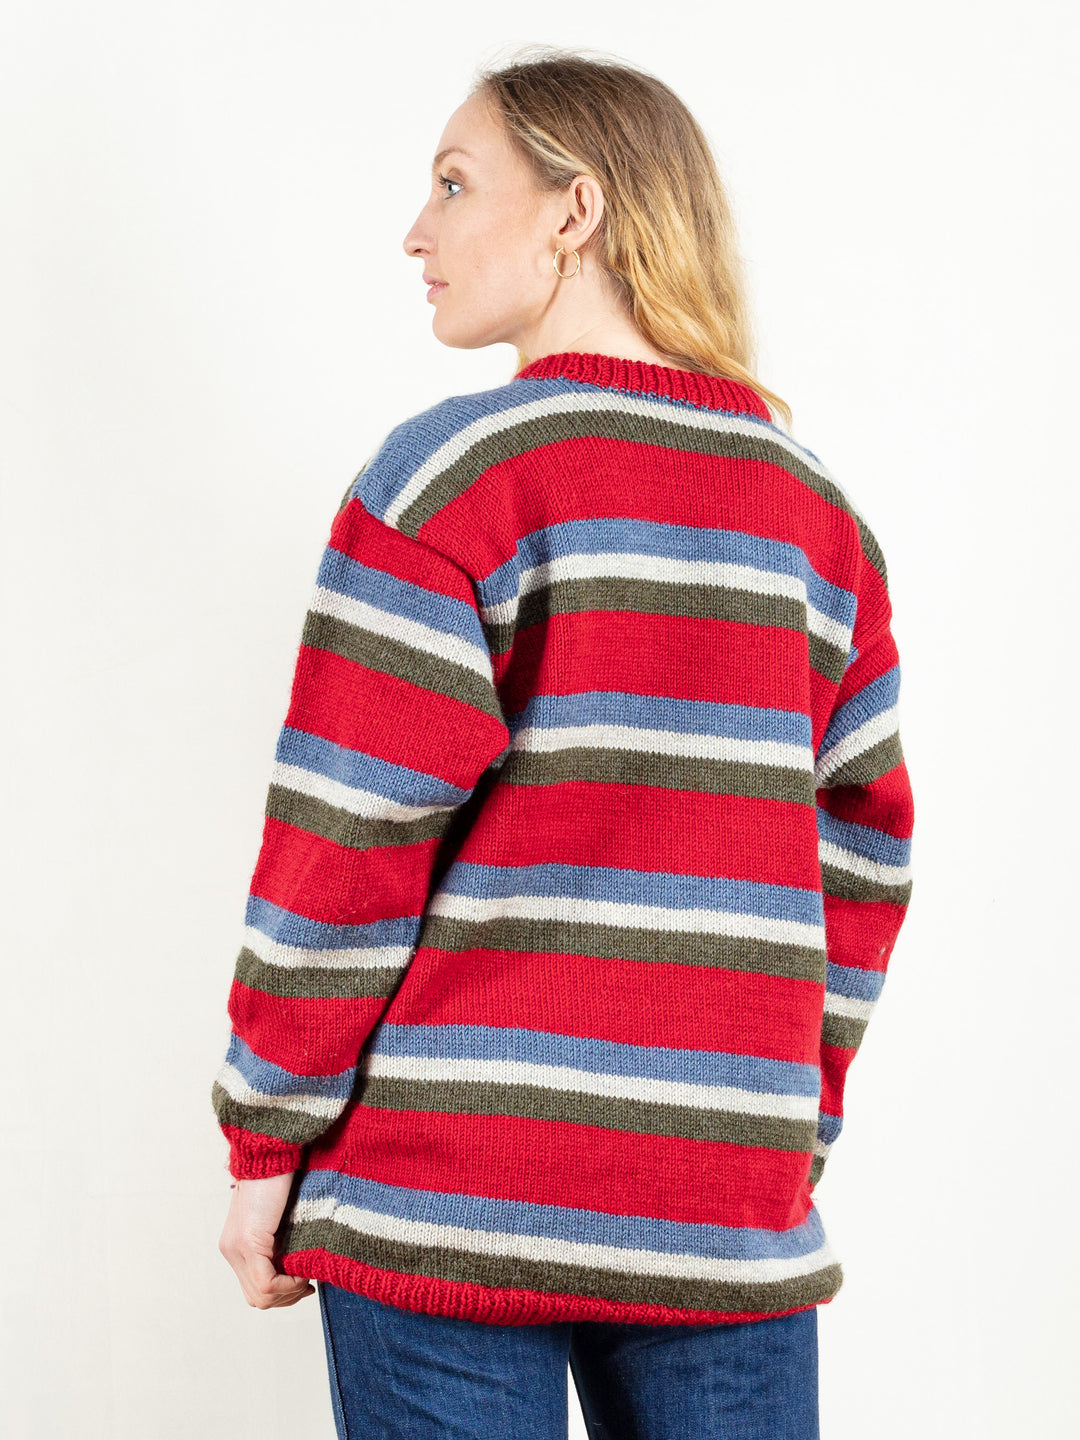 Striped Knit Sweater vintage 90s wool blend pullover ski sweater patterned sweater oversized women jumper knitted pulli size medium